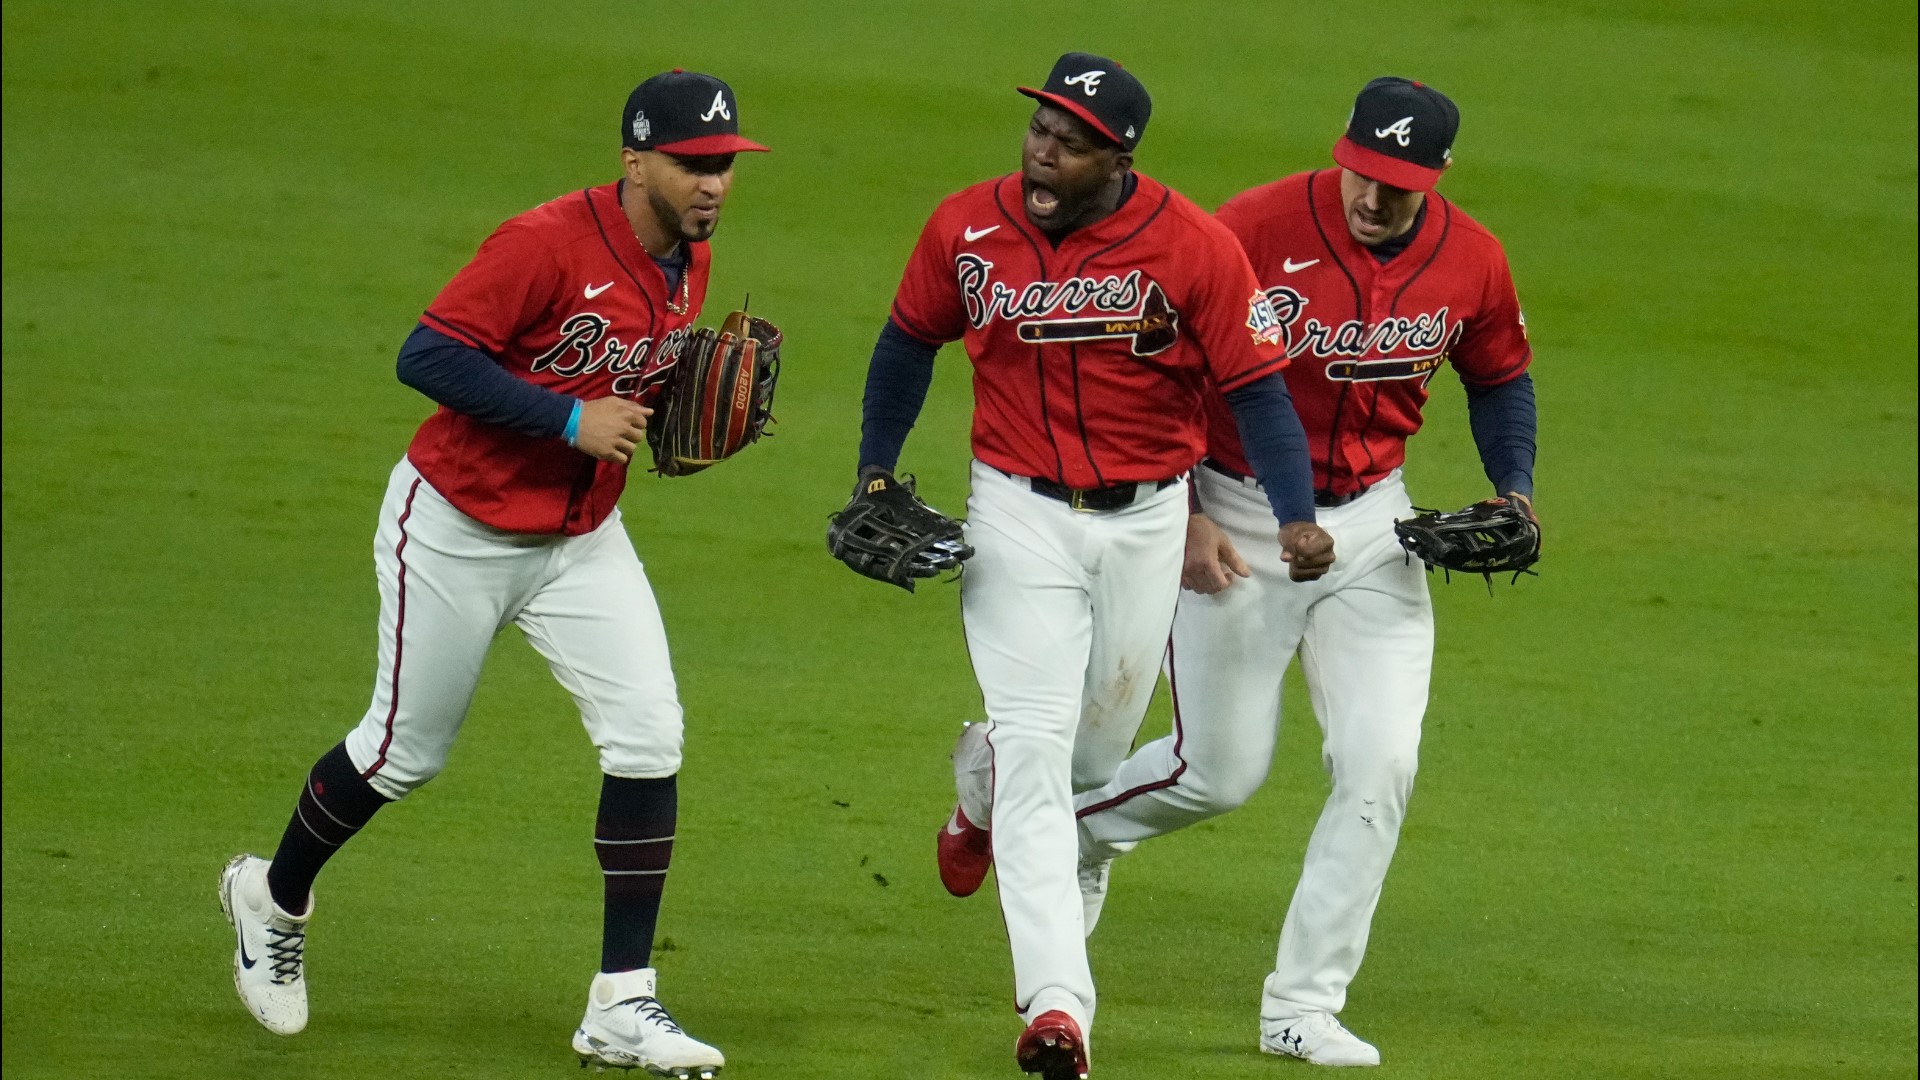 Braves beat Astros in World Series Game 3, MLB highlights